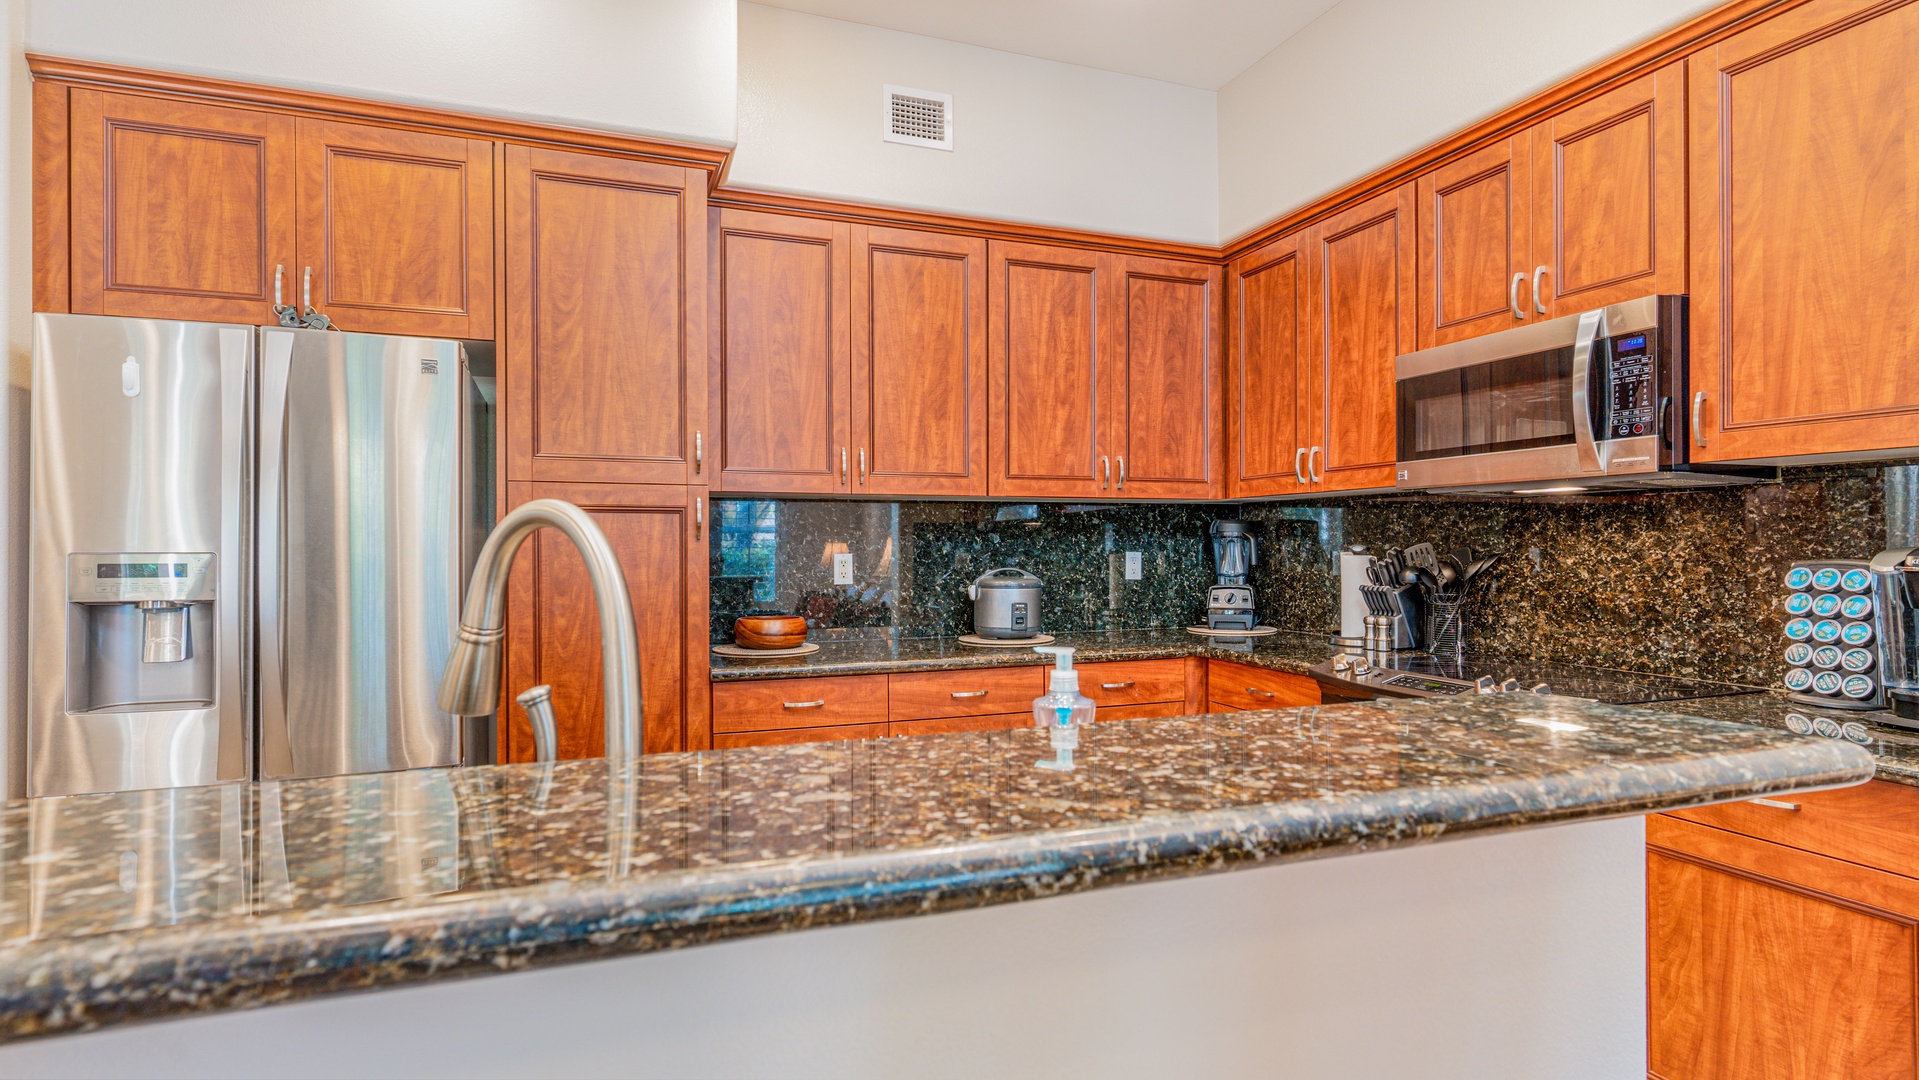 Kapolei Vacation Rentals, Coconut Plantation 1234-2 - The high end kitchen area flows seamlessly with the living and dining rooms.